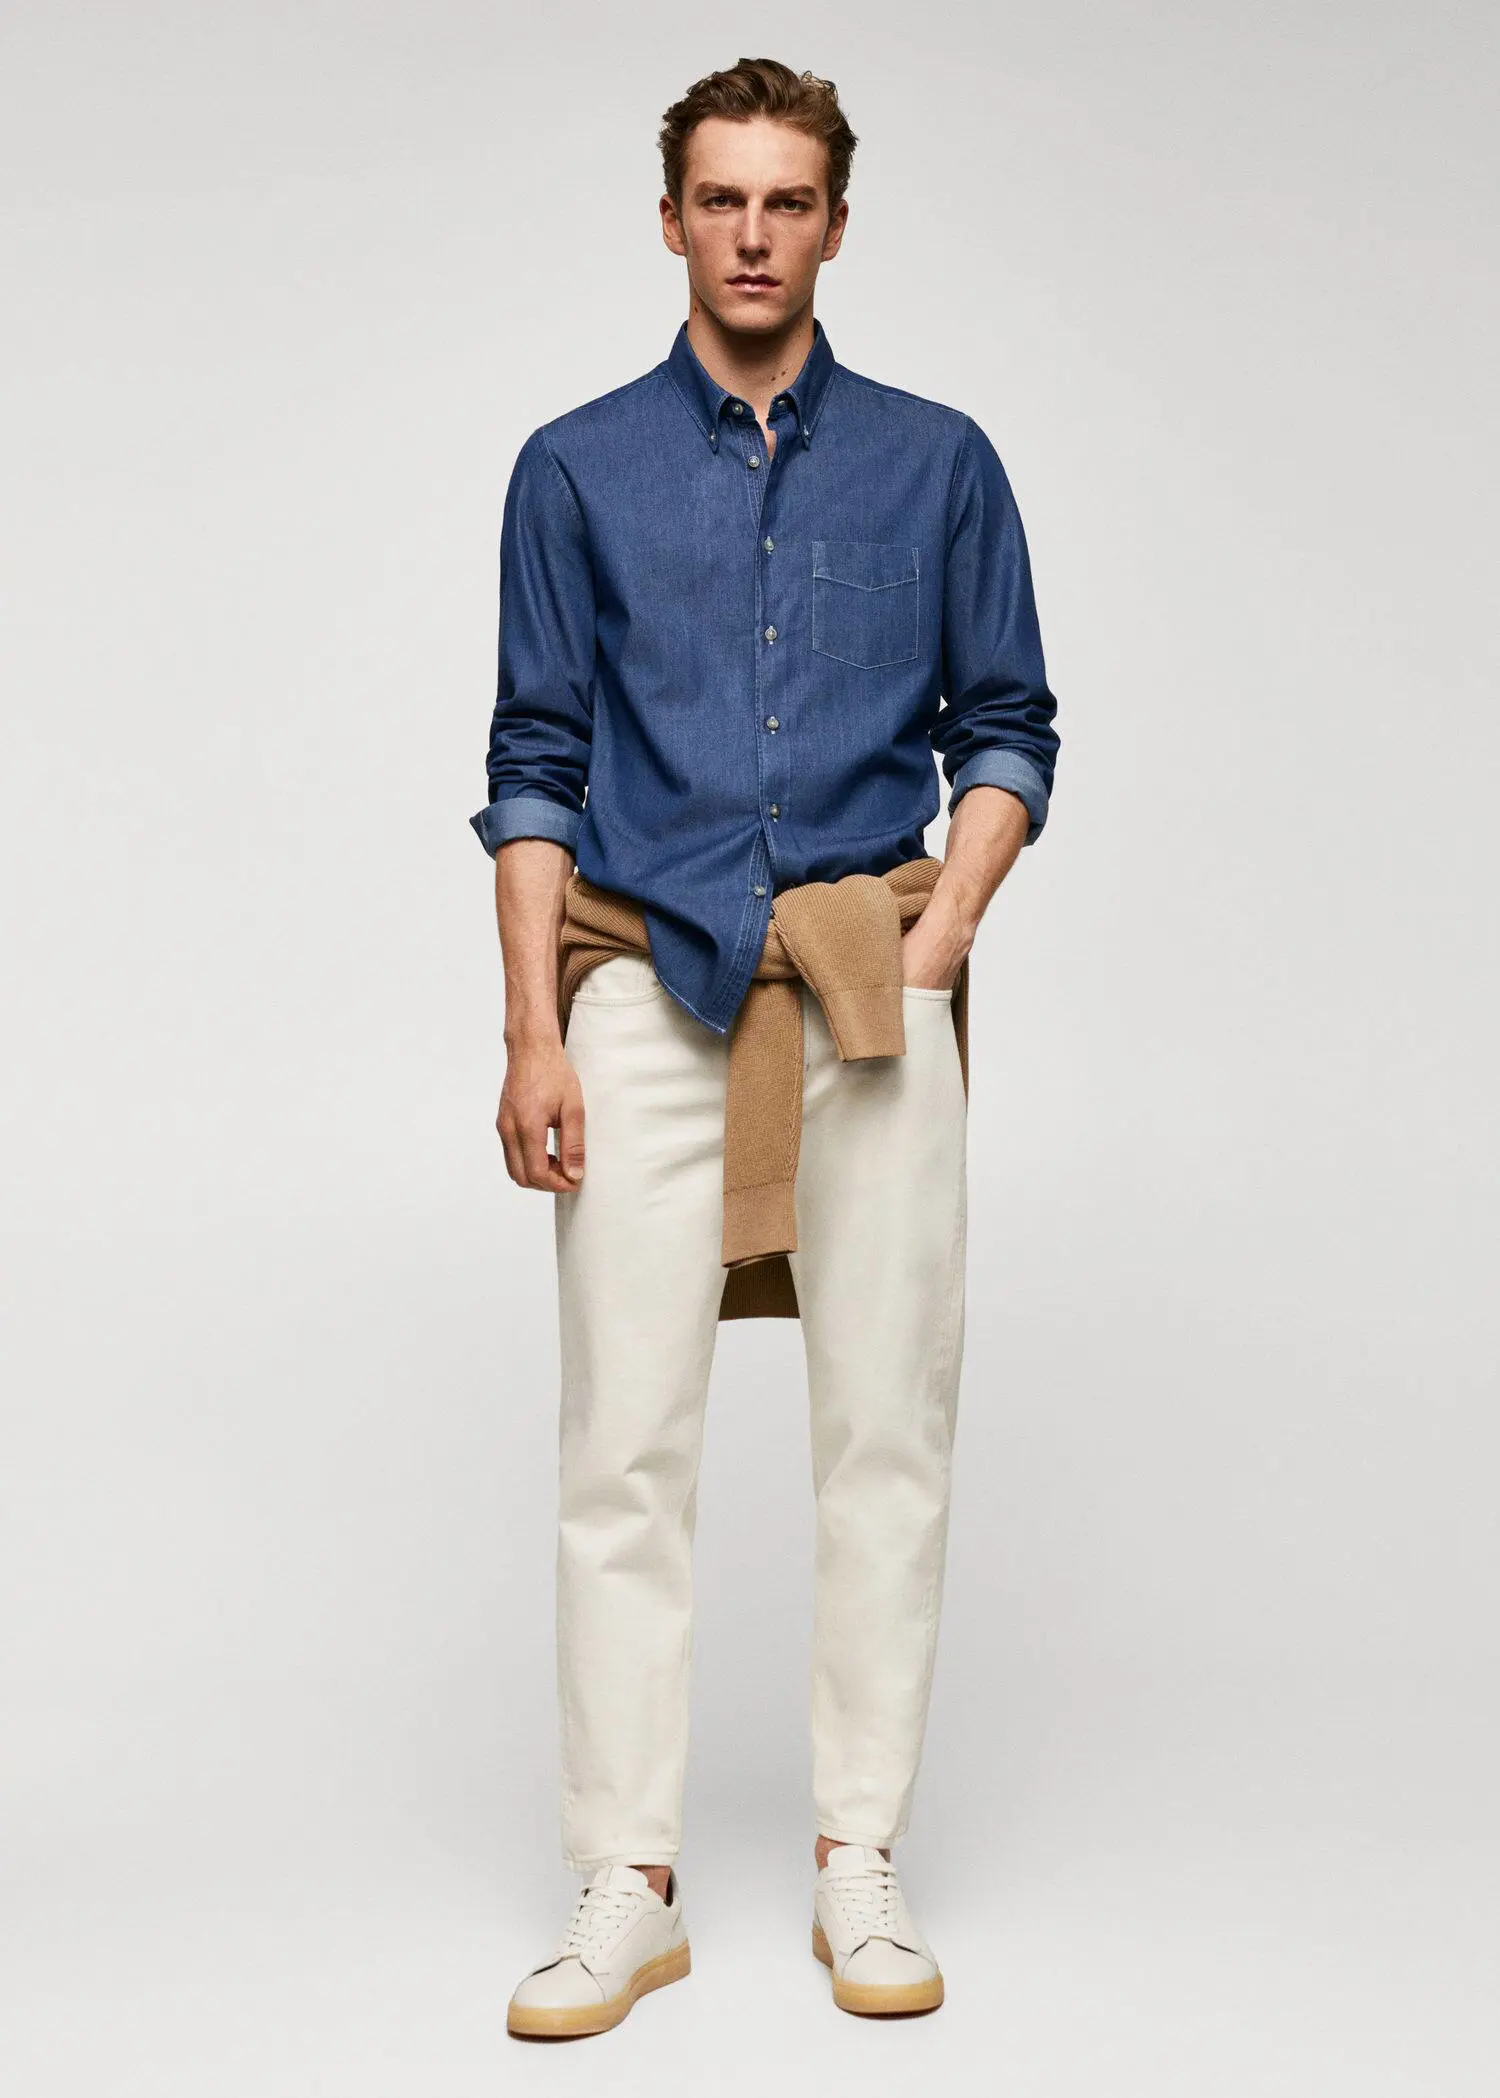 Mango Slim-fit denim skirt with pockets. a man wearing a blue shirt and white pants. 